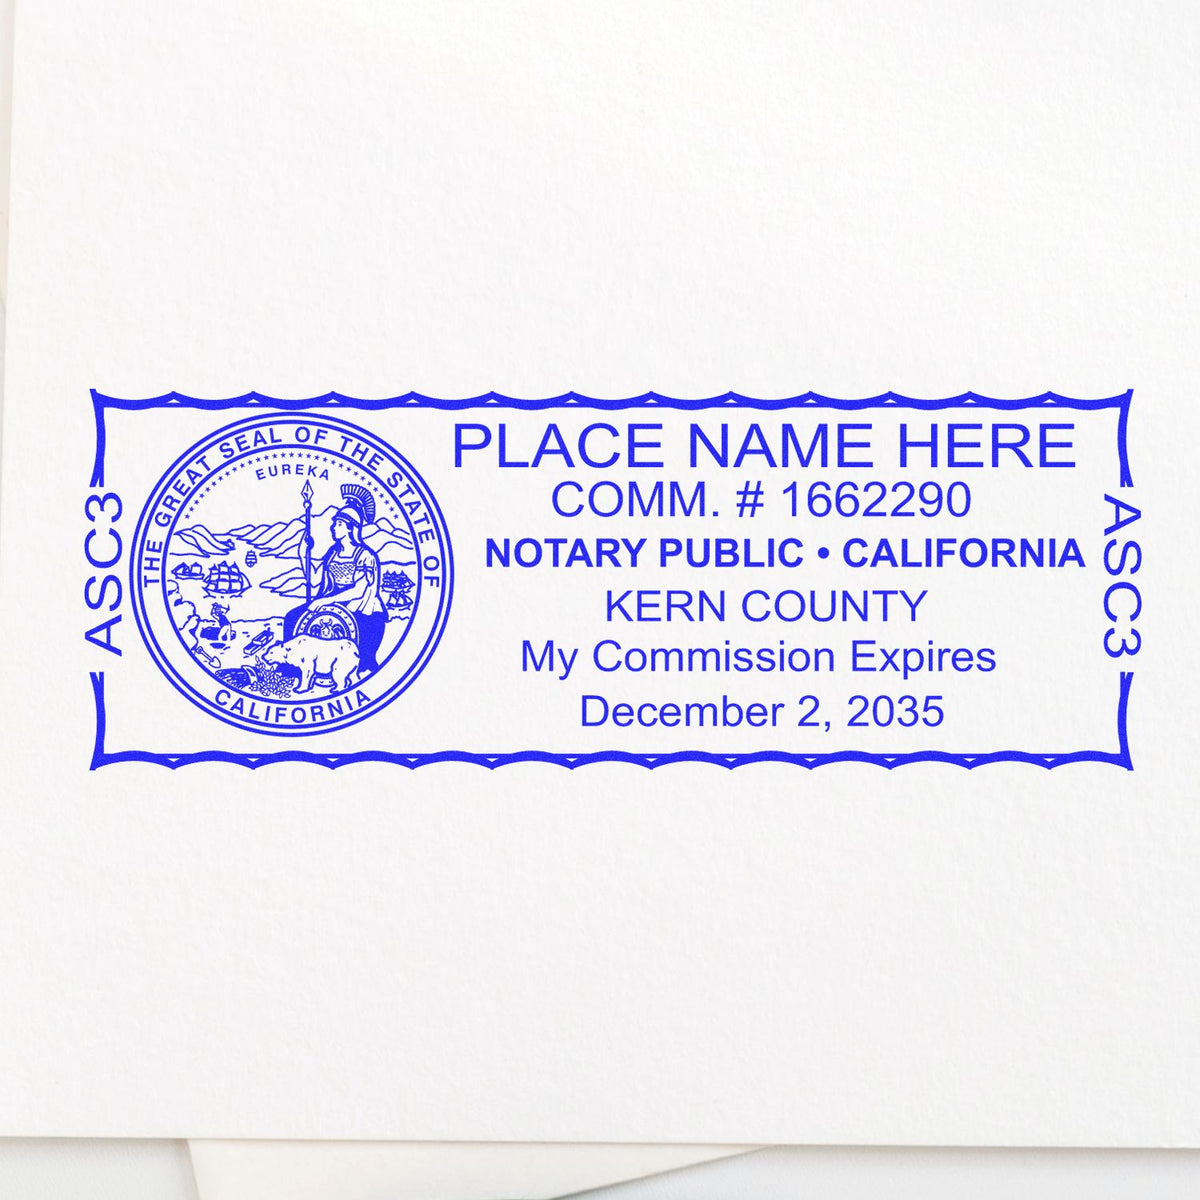 This paper is stamped with a sample imprint of the Slim Pre-Inked State Seal Notary Stamp for California, signifying its quality and reliability.